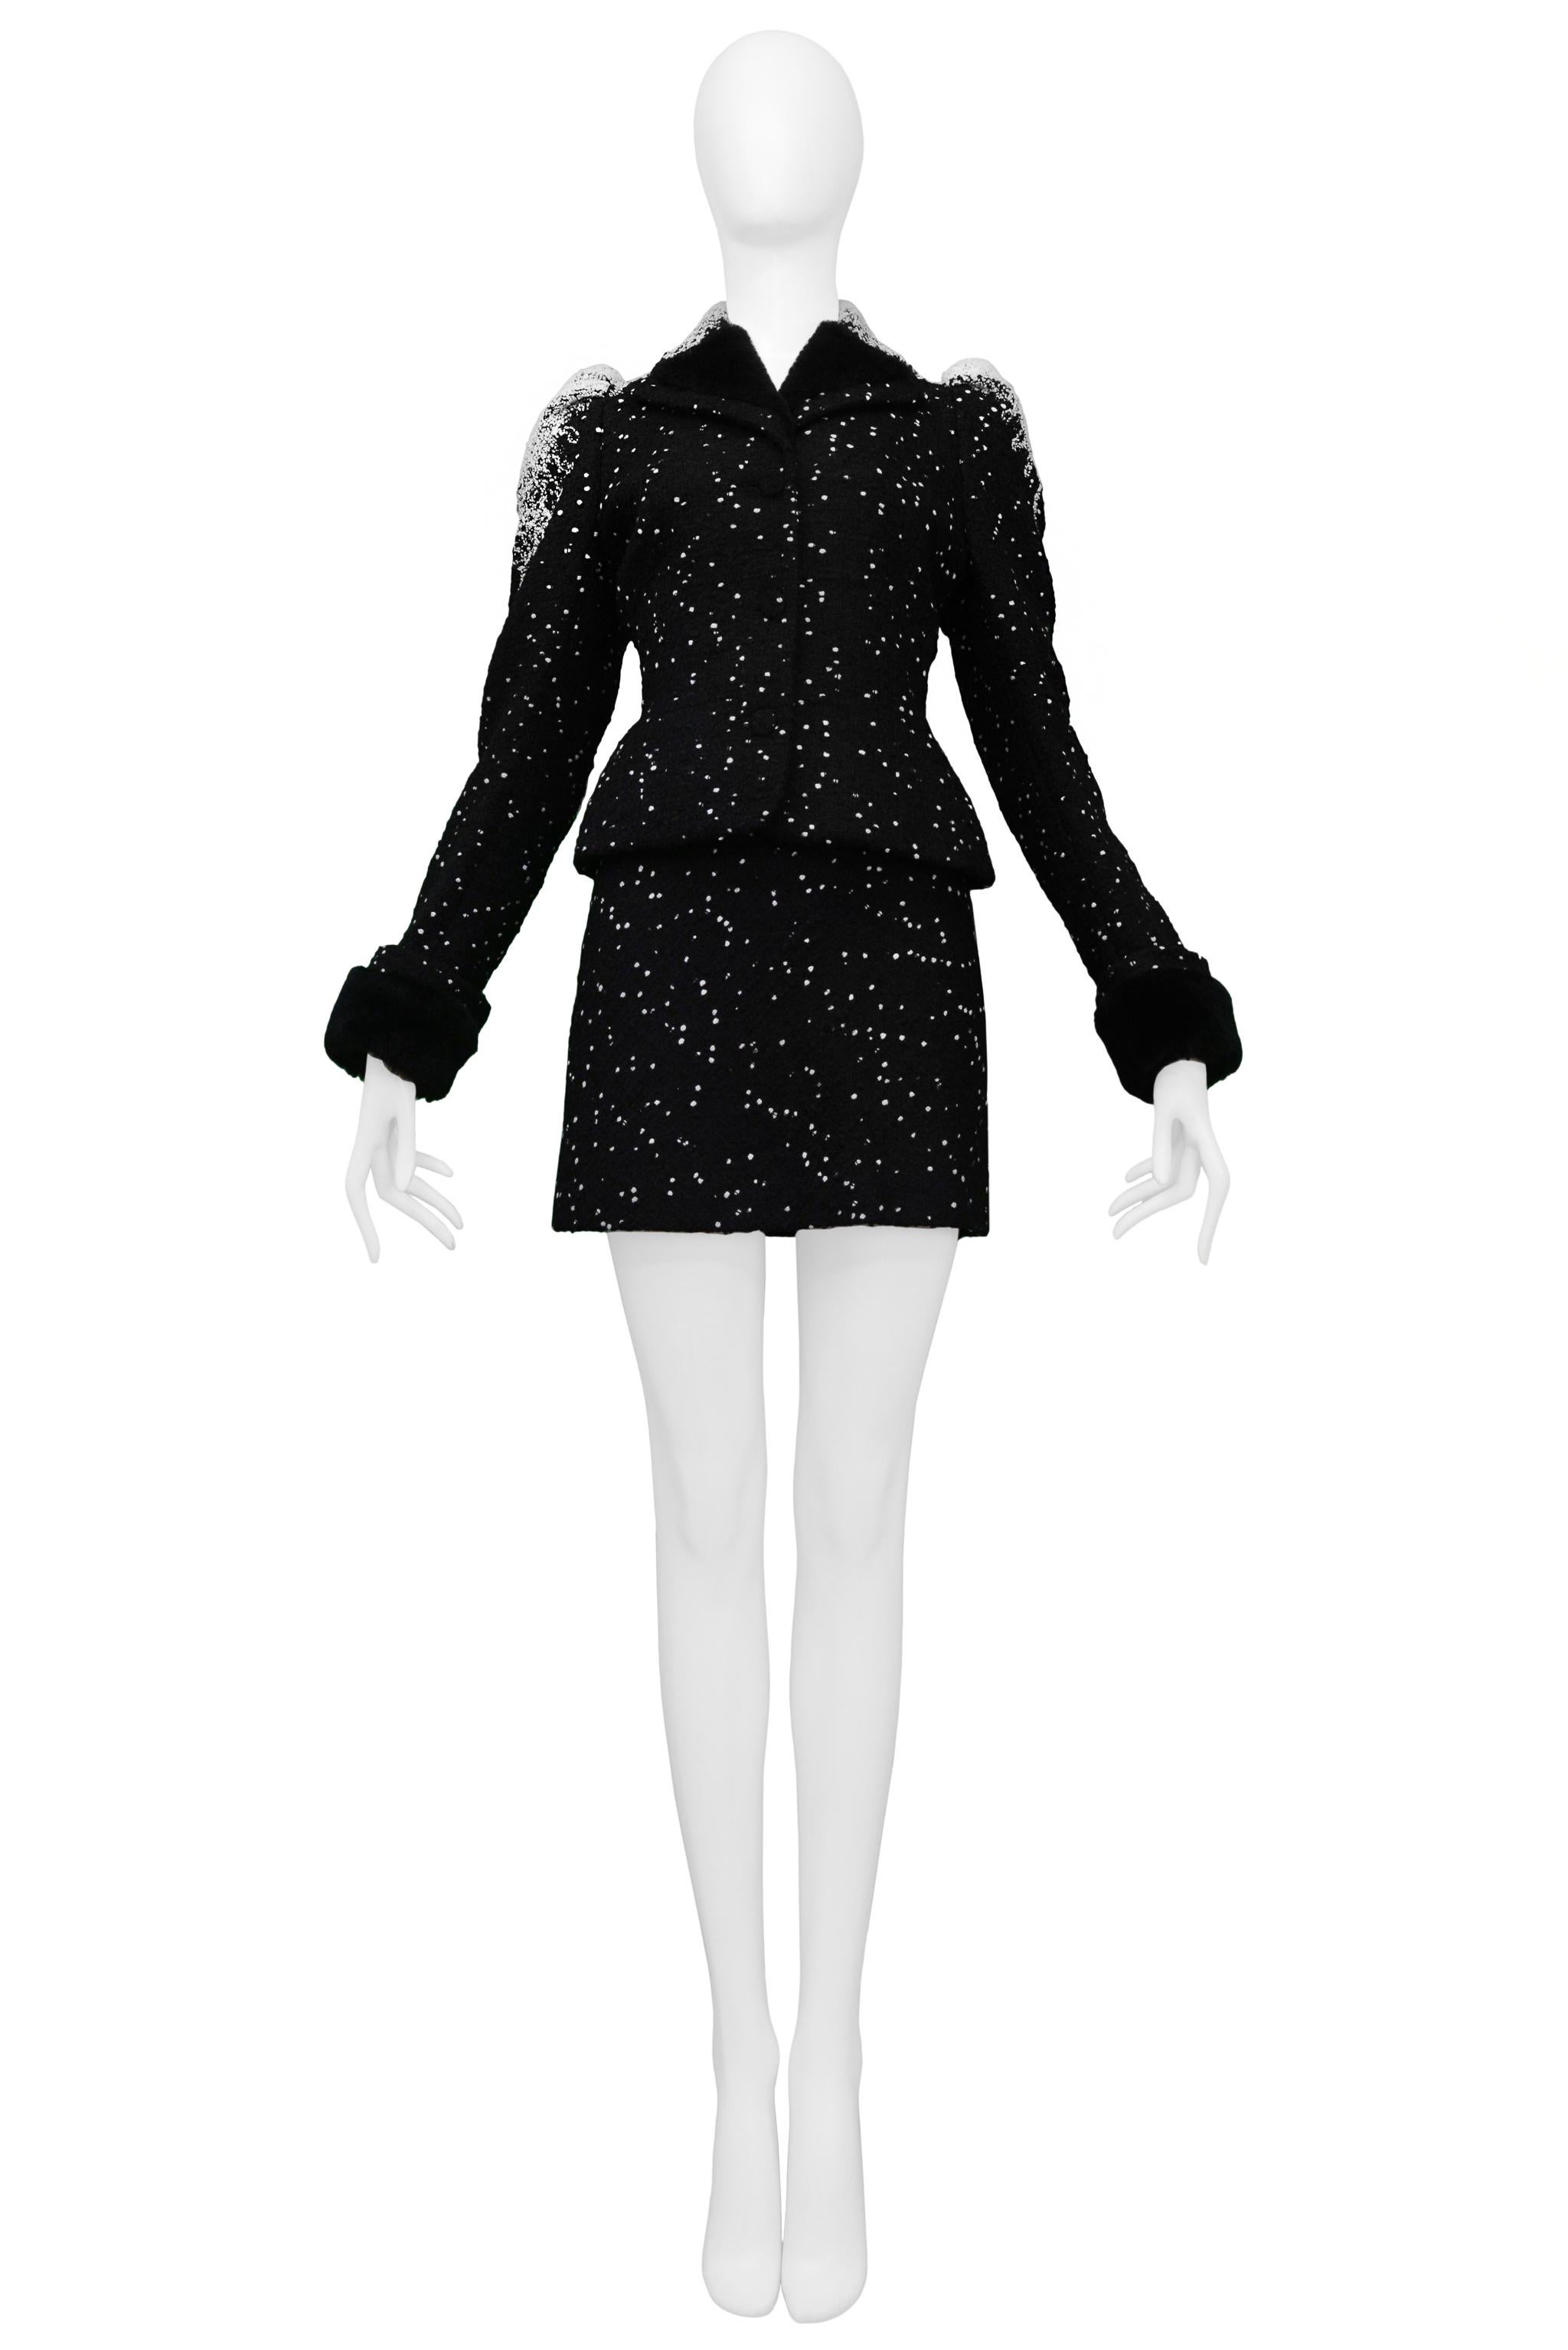 Resurrection Vintage is pleased to offer a vintage John Galliano black and white skirt suit featuring a fitted jacket with white stitching all over the shoulders, front buttons, and flared peplum. The skirt features a mini body and a side